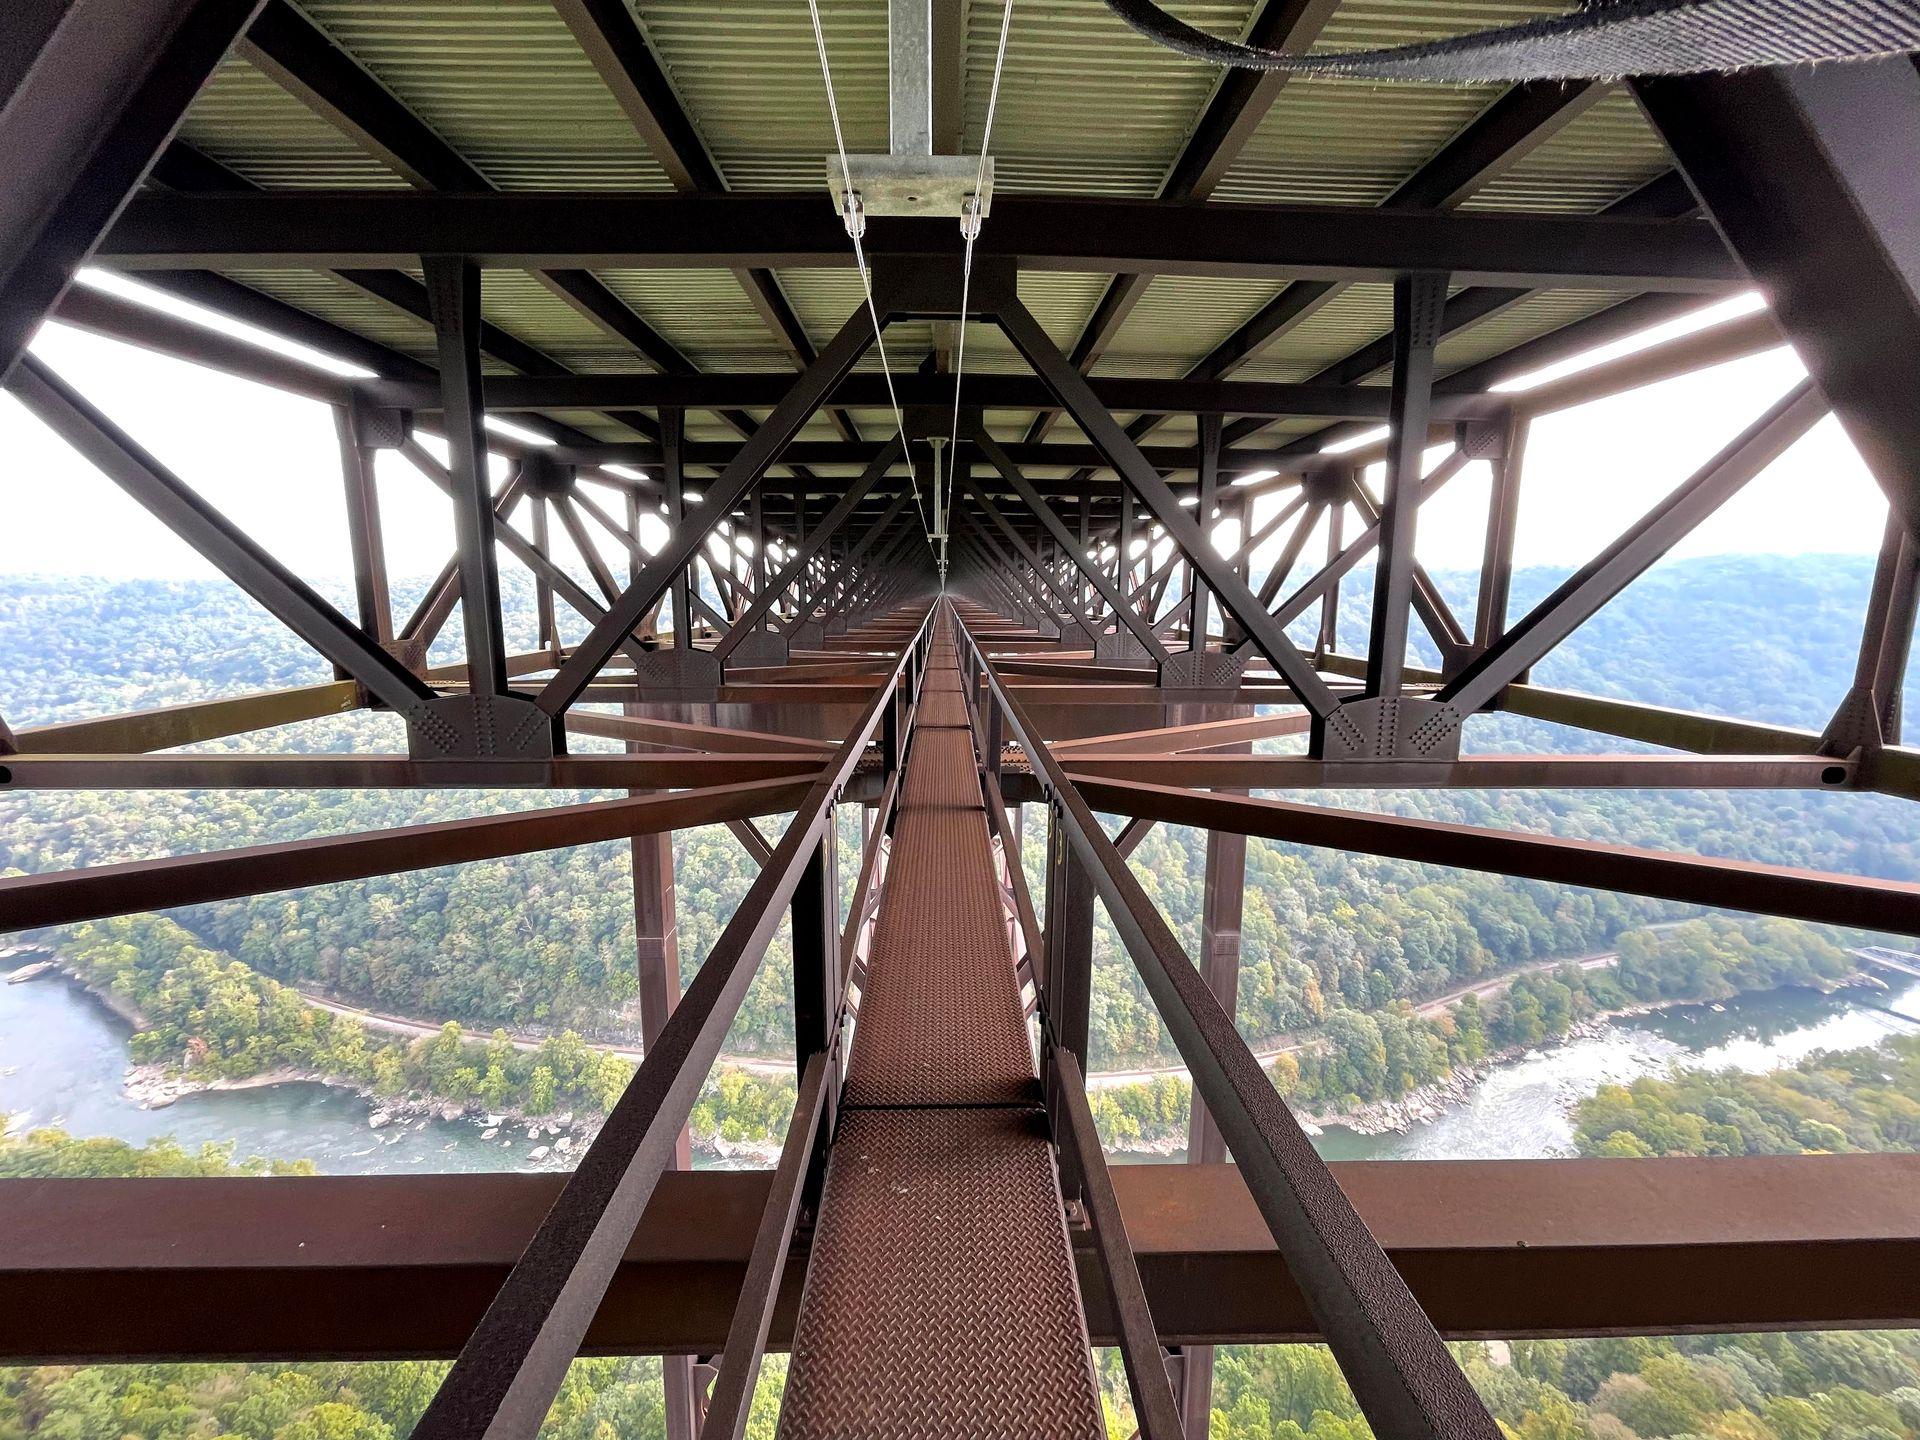 Standing on the catwalk below the New River Gorge Bridge.